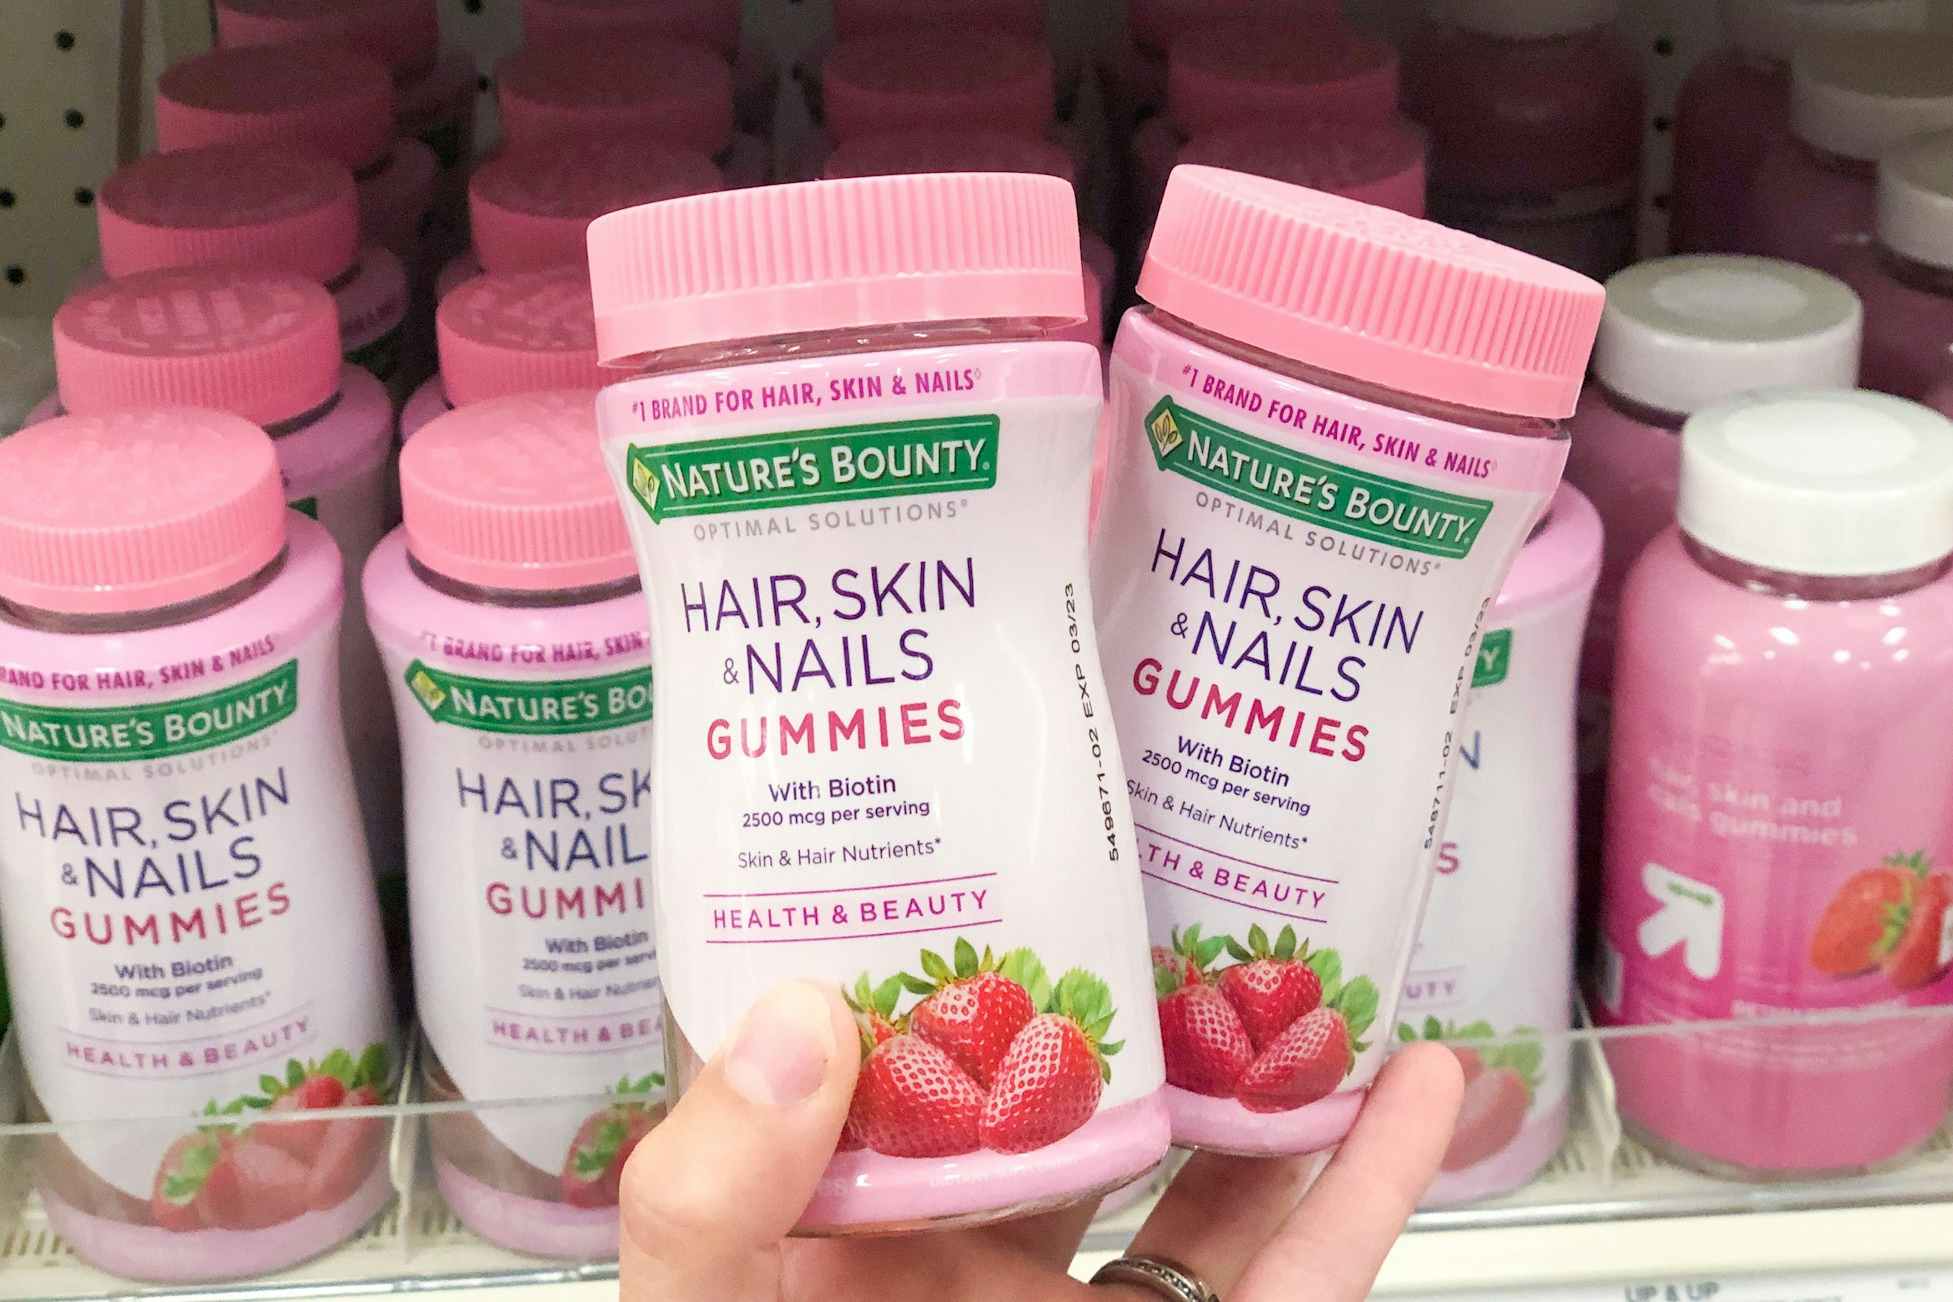 Nature's Bounty Hair, Skin & Nails Vitamins, as Low as $4.86 on Amazon